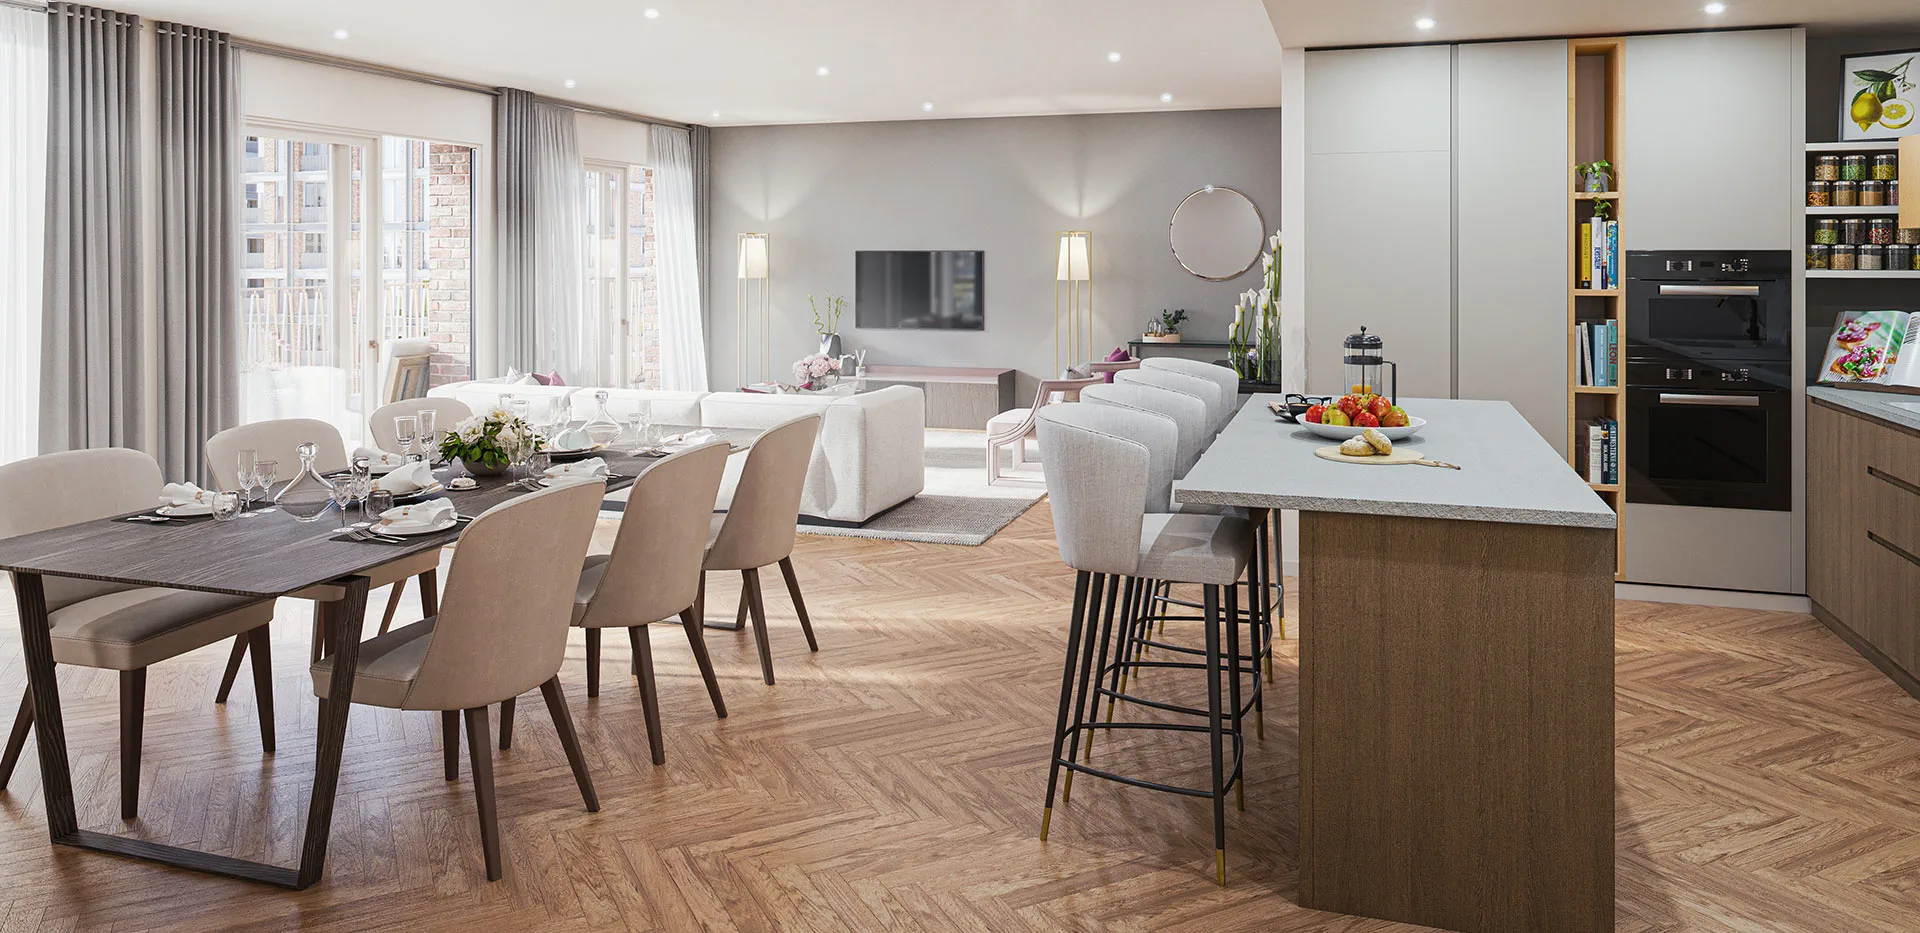 st-william_kings-road-park_interiors_living-dining-kitchen